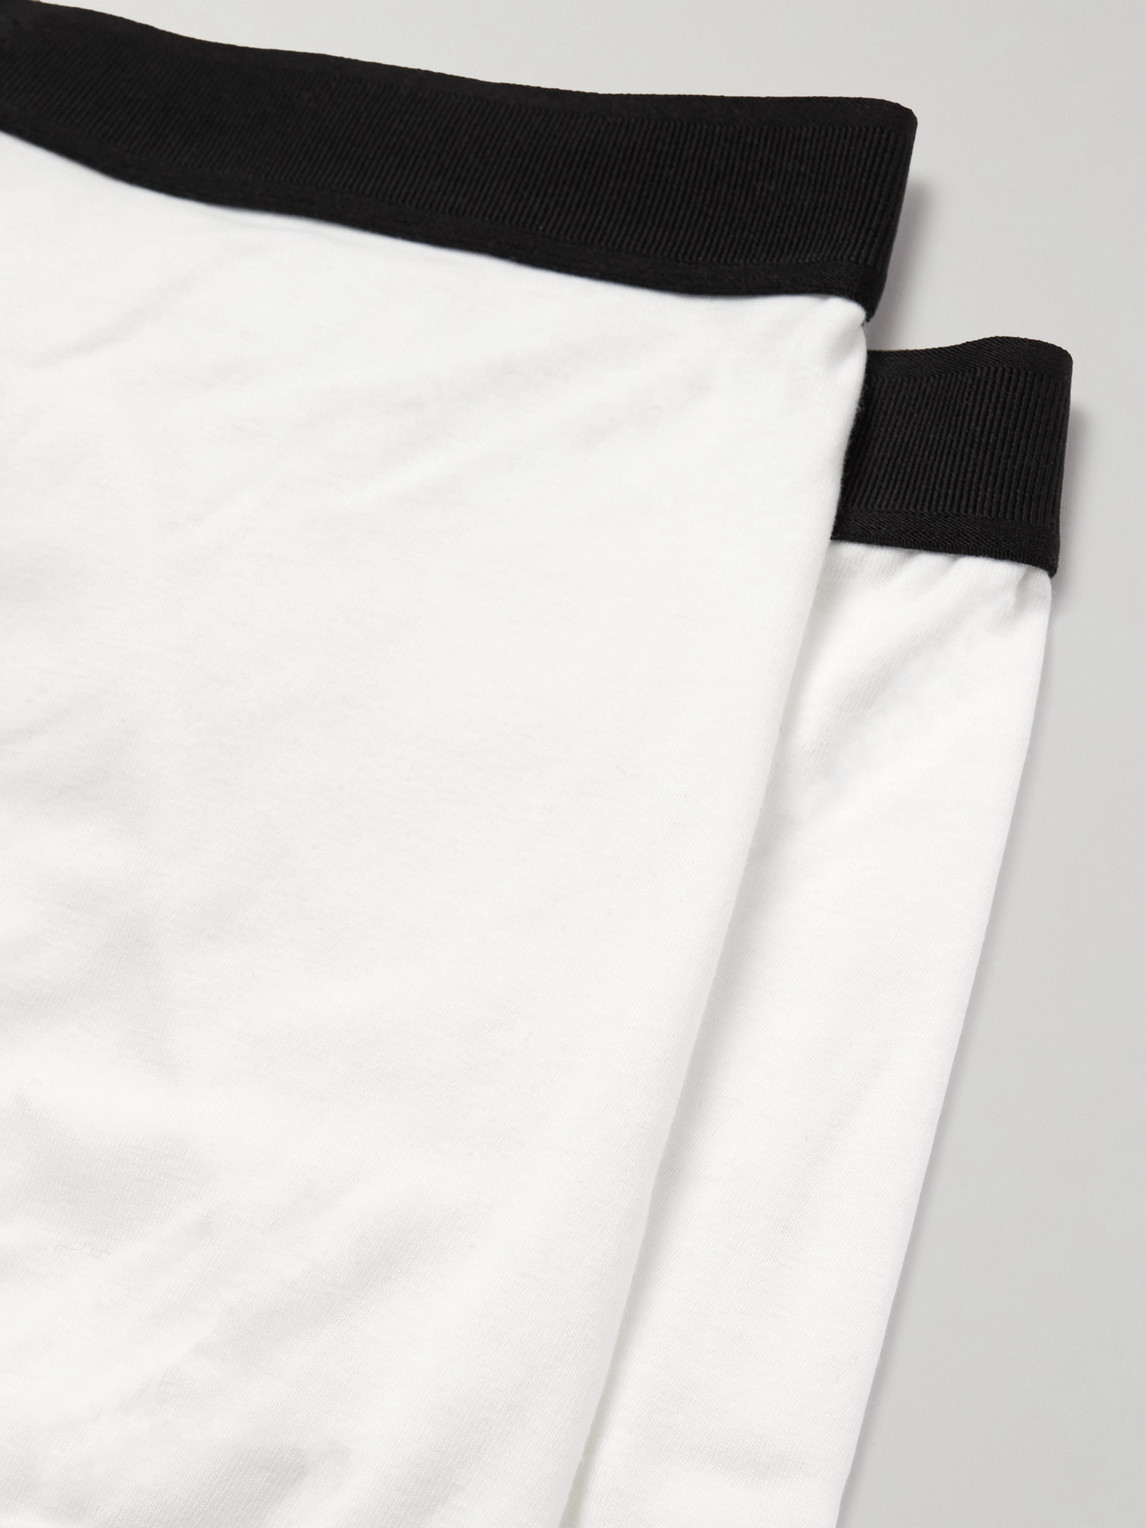 Shop Tom Ford Two-pack Stretch-cotton Boxer Briefs In White